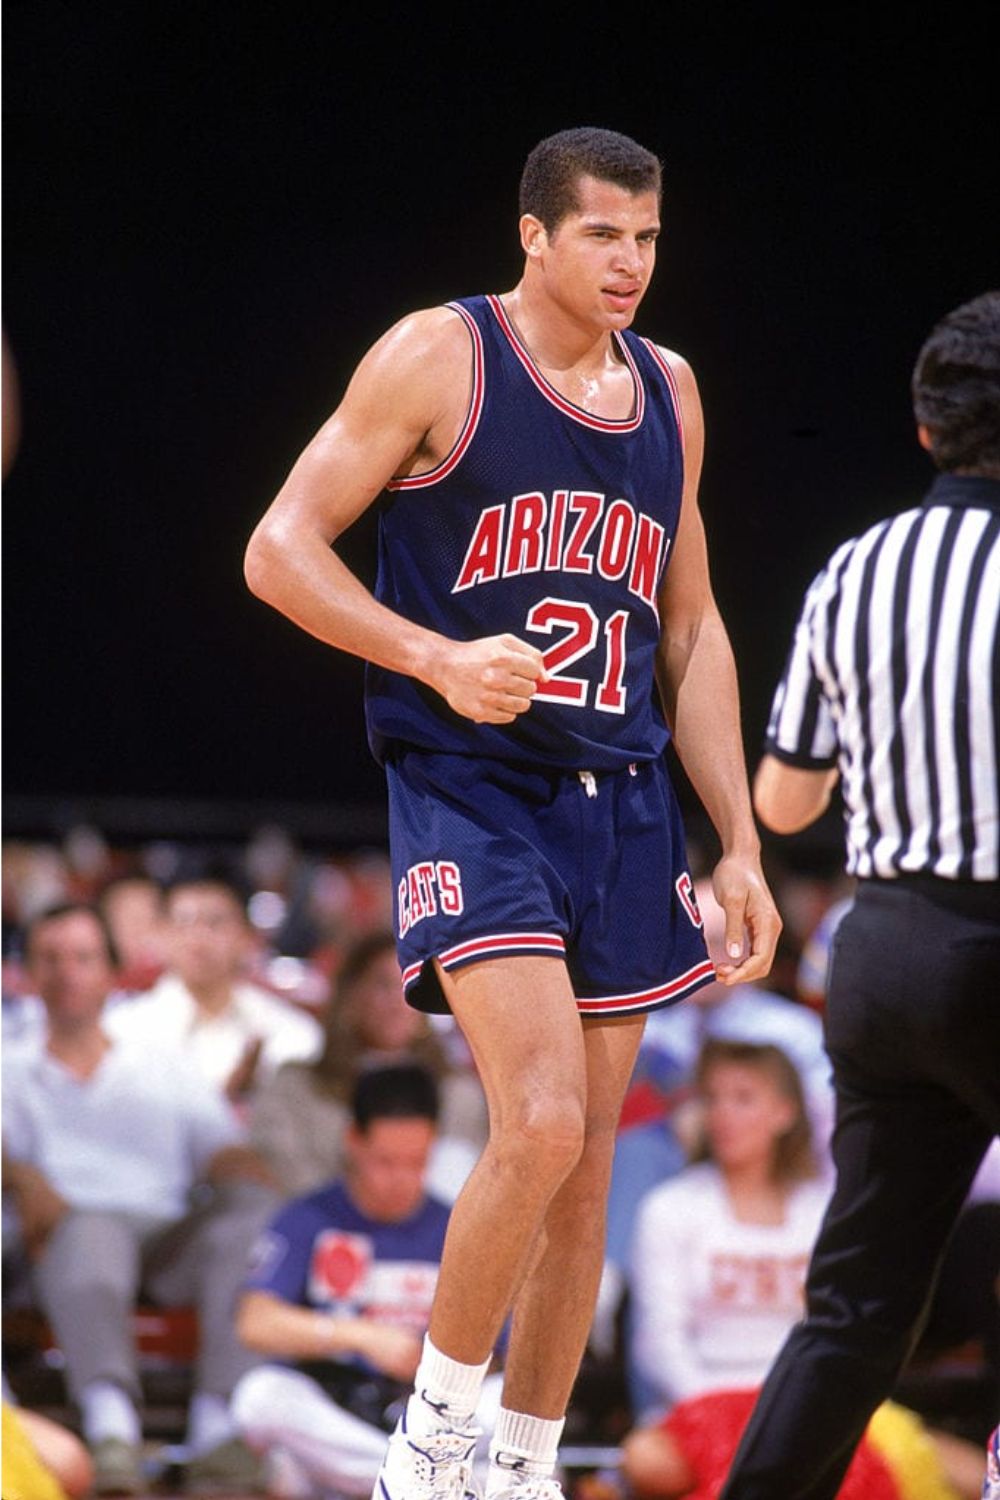 Bison Dele, Late American Basketball Player